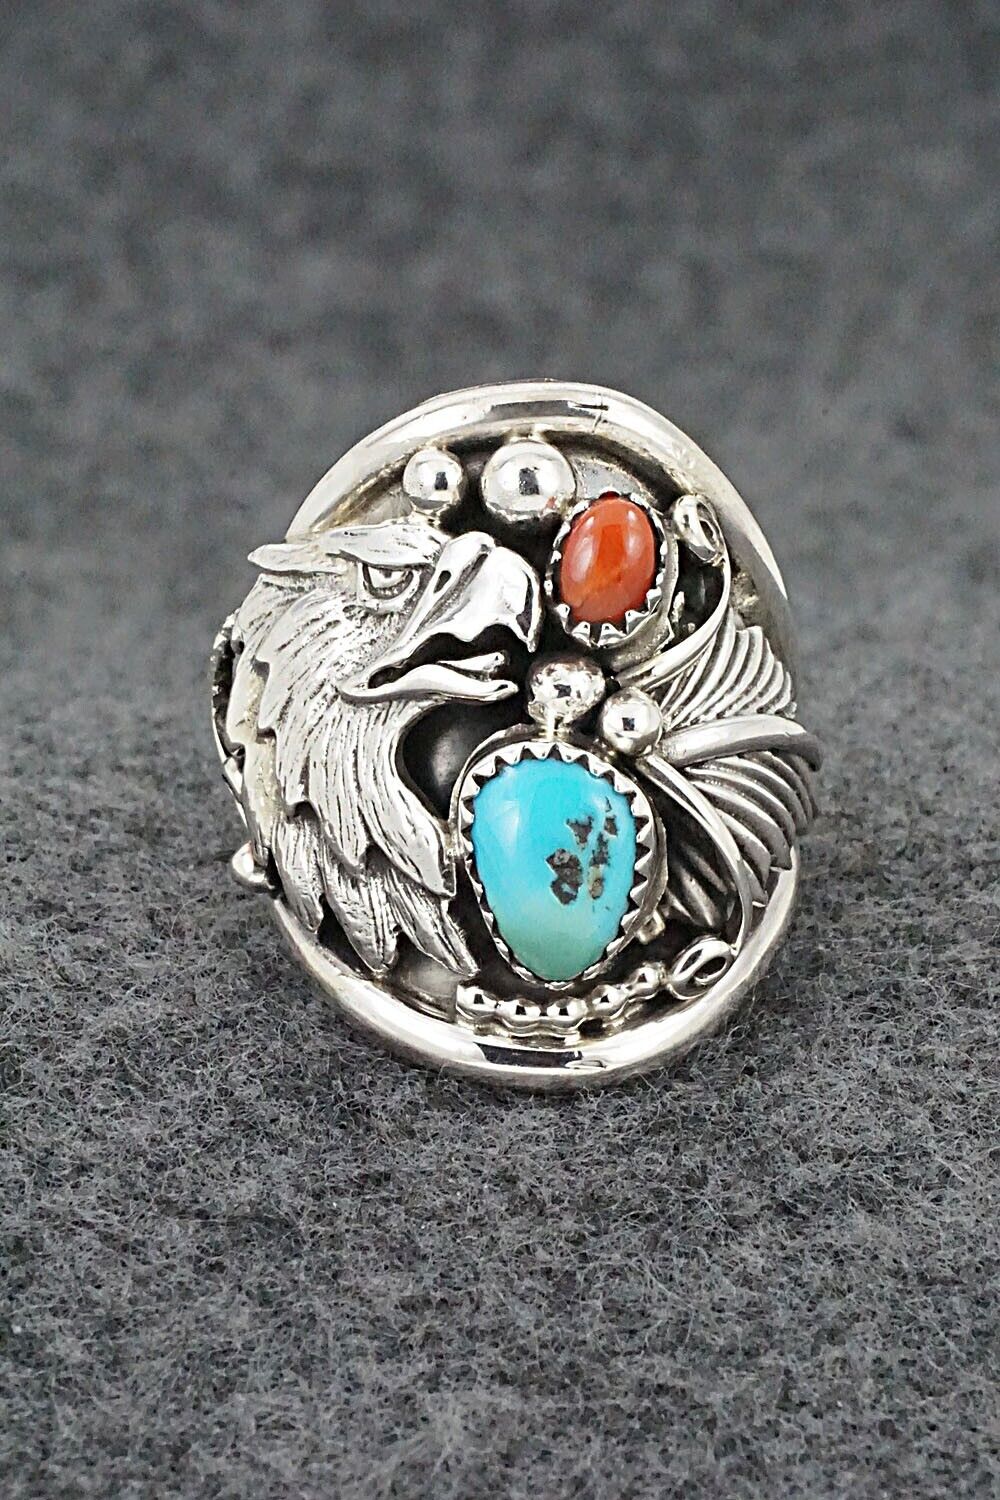 Turquoise, Coral & Sterling Silver Ring - Jeannette Saunders - Size 9.25